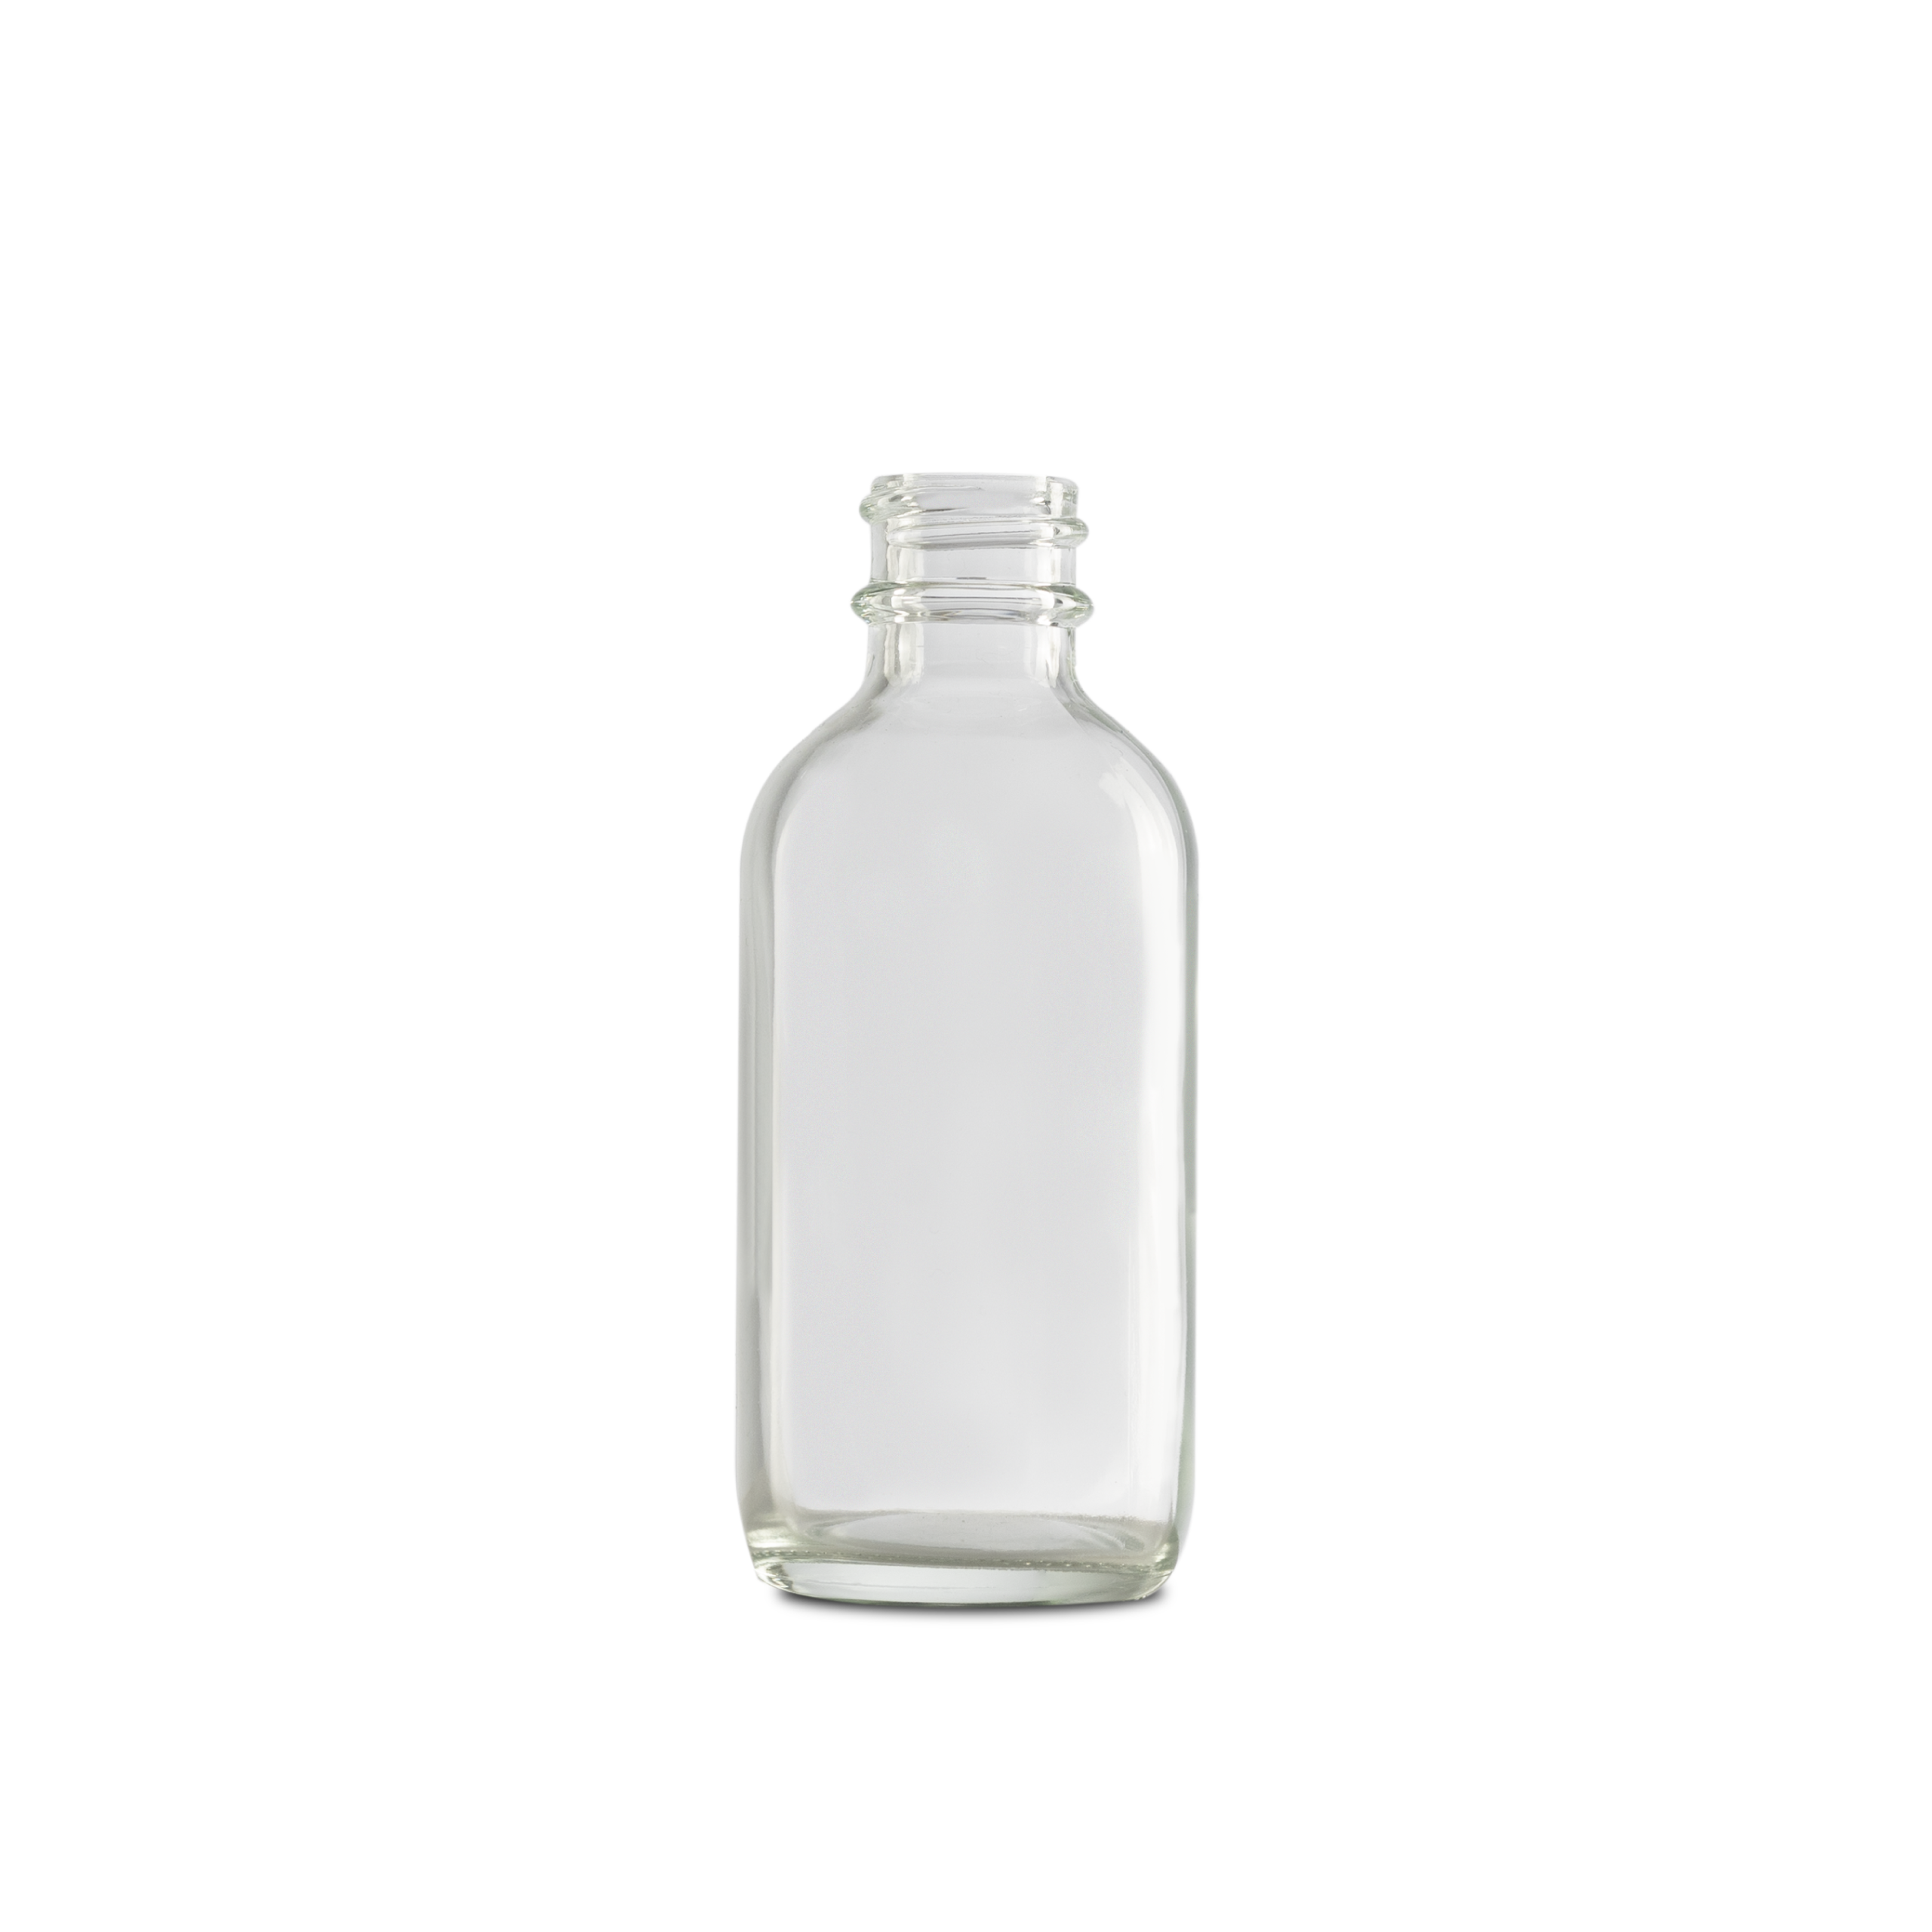 2 oz clear glass bottle is an economical option for packaging liquids. clear glass allows the consumer to see the product from all sides.